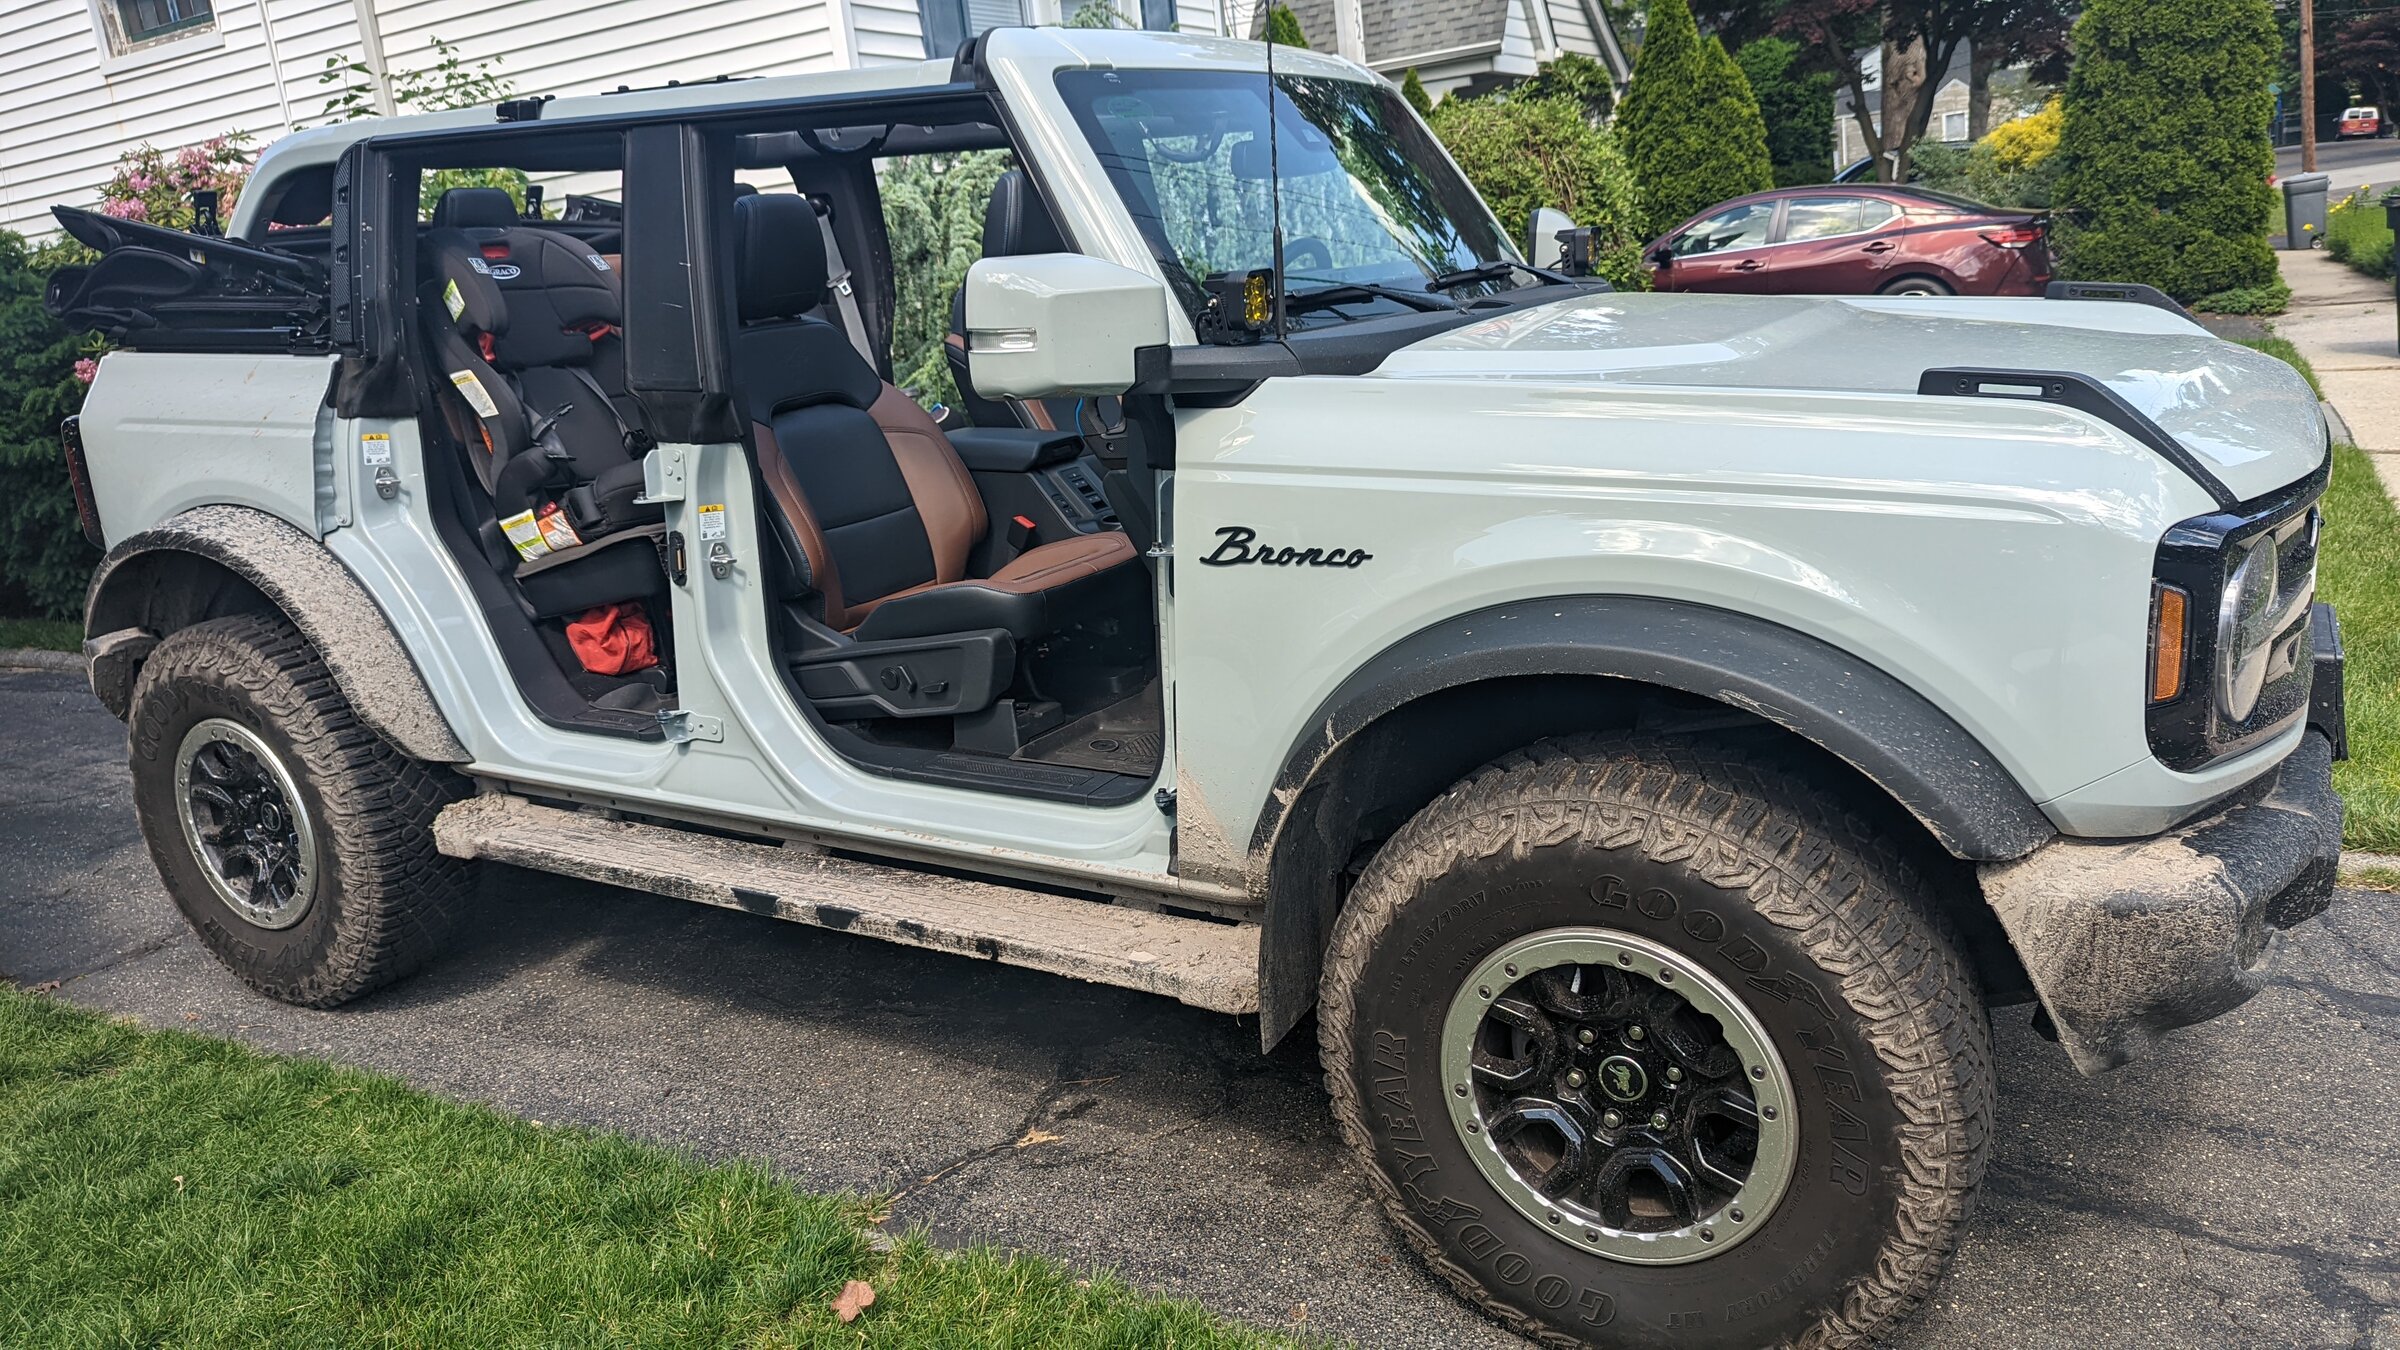 Ford Bronco Let’s see your doors off pics… PXL_20220531_193540791